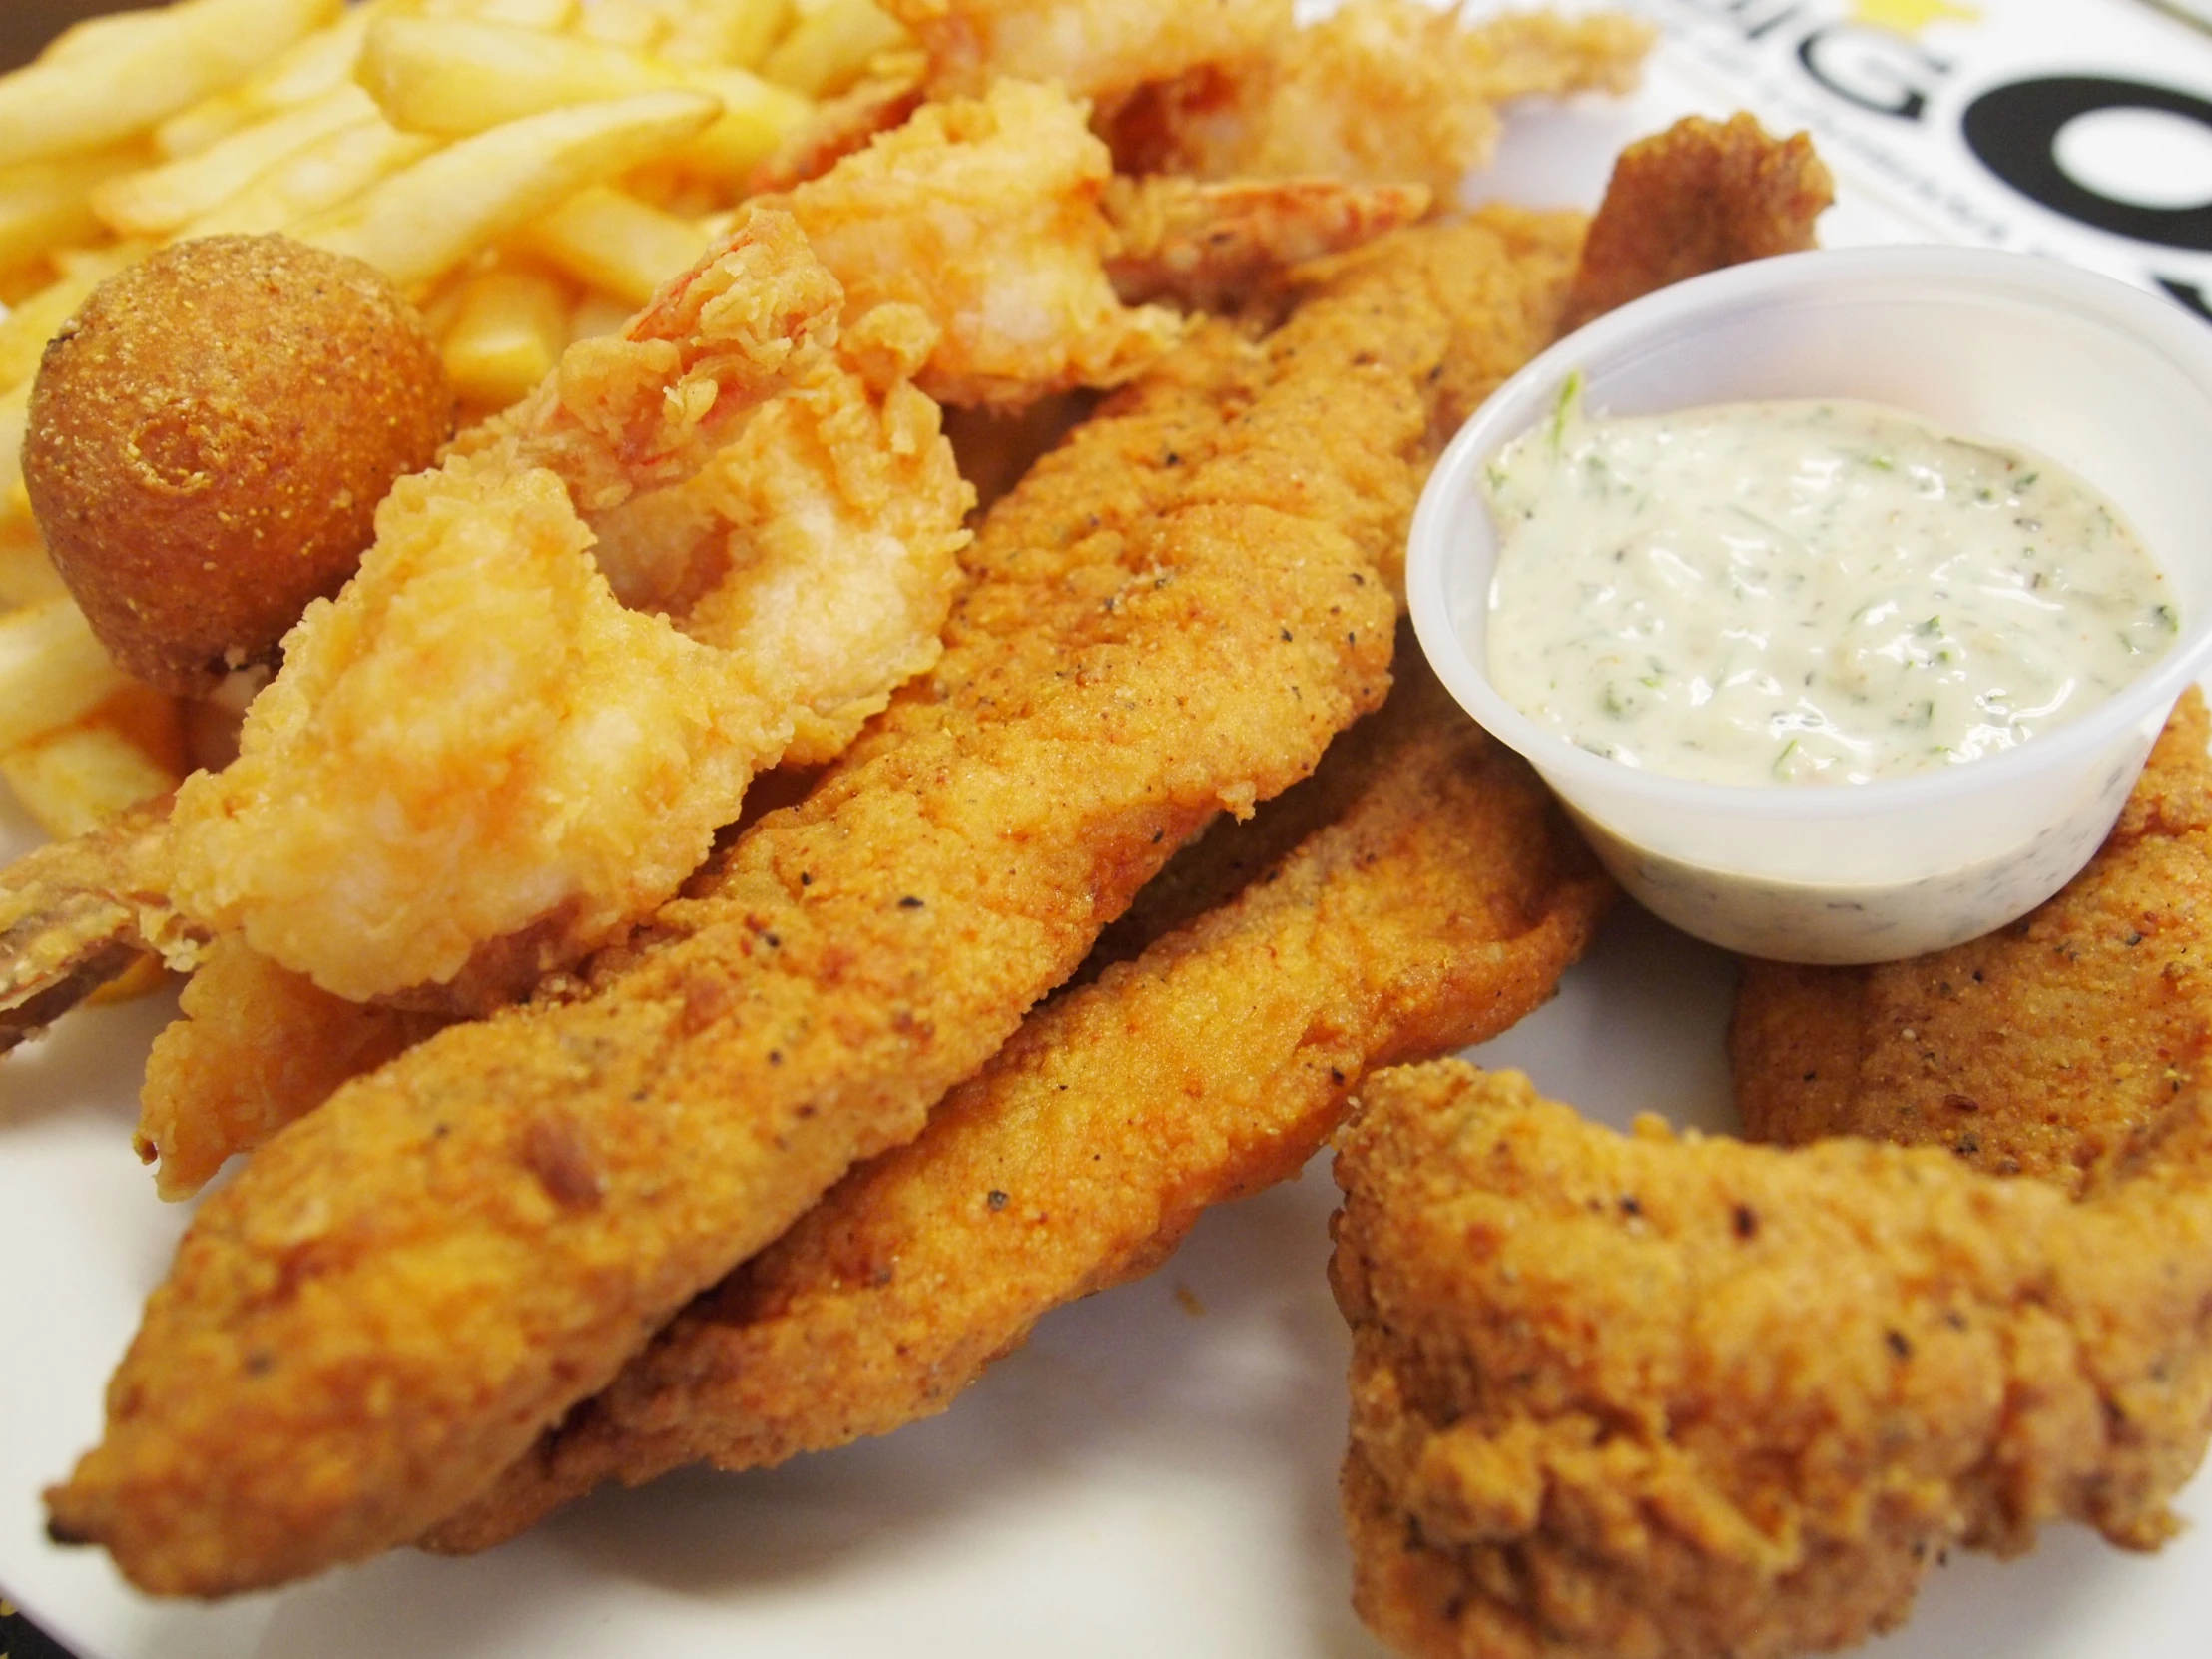 a plate topped with fried fish and fries next to dipping sauce